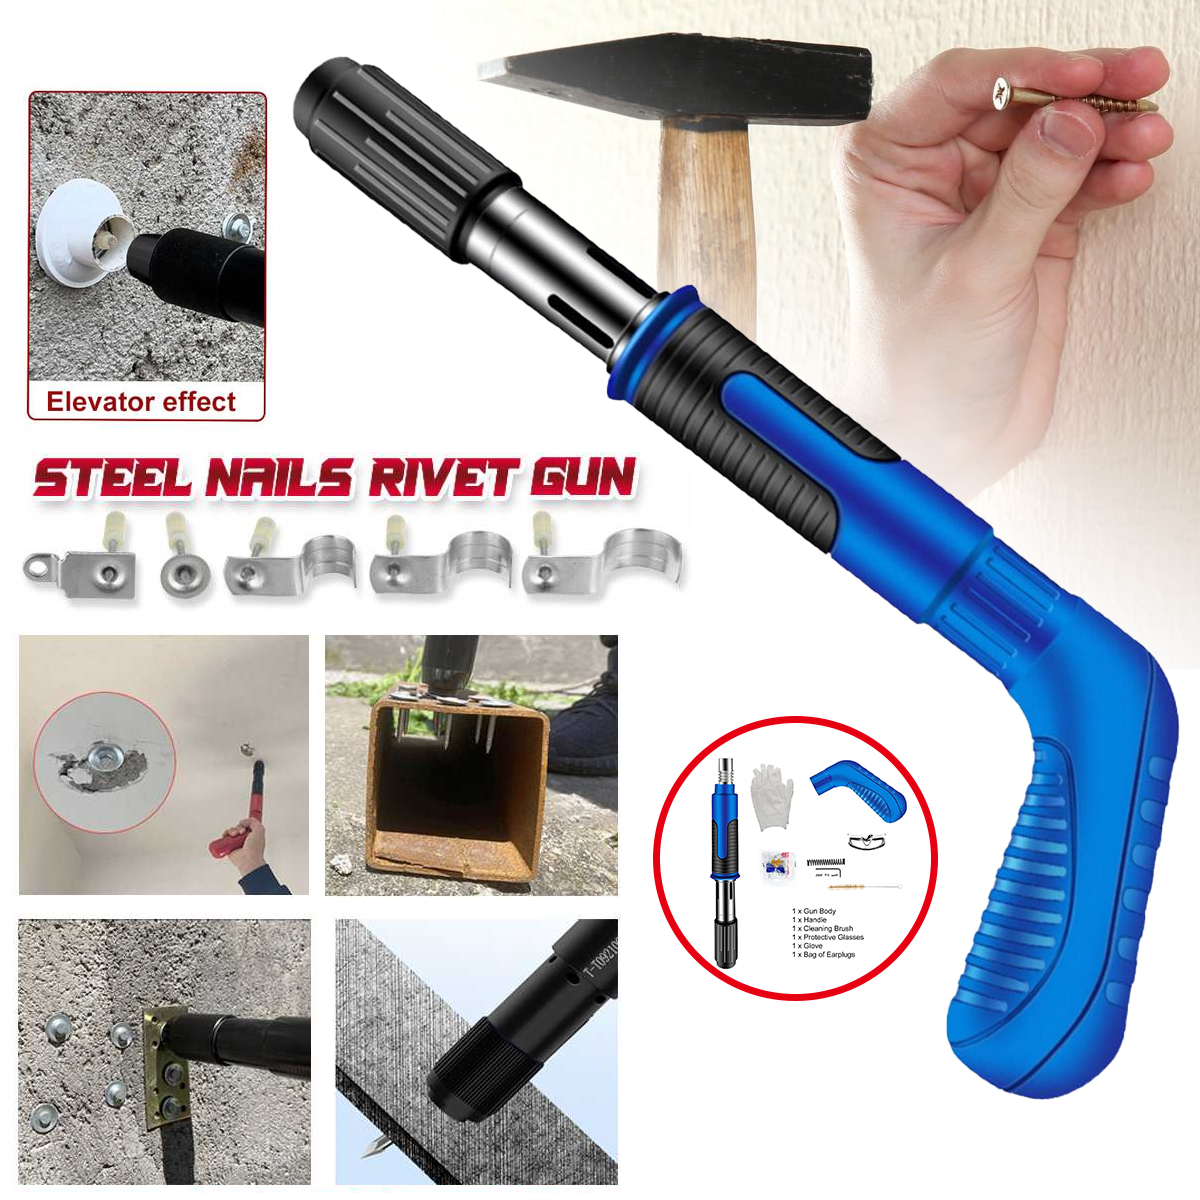 Electric-Nail-Guns-Electric-Staple-Straight-Rechargeable-Automatic-Max-40mm-Special-Use-Wood-Working-1901163-1